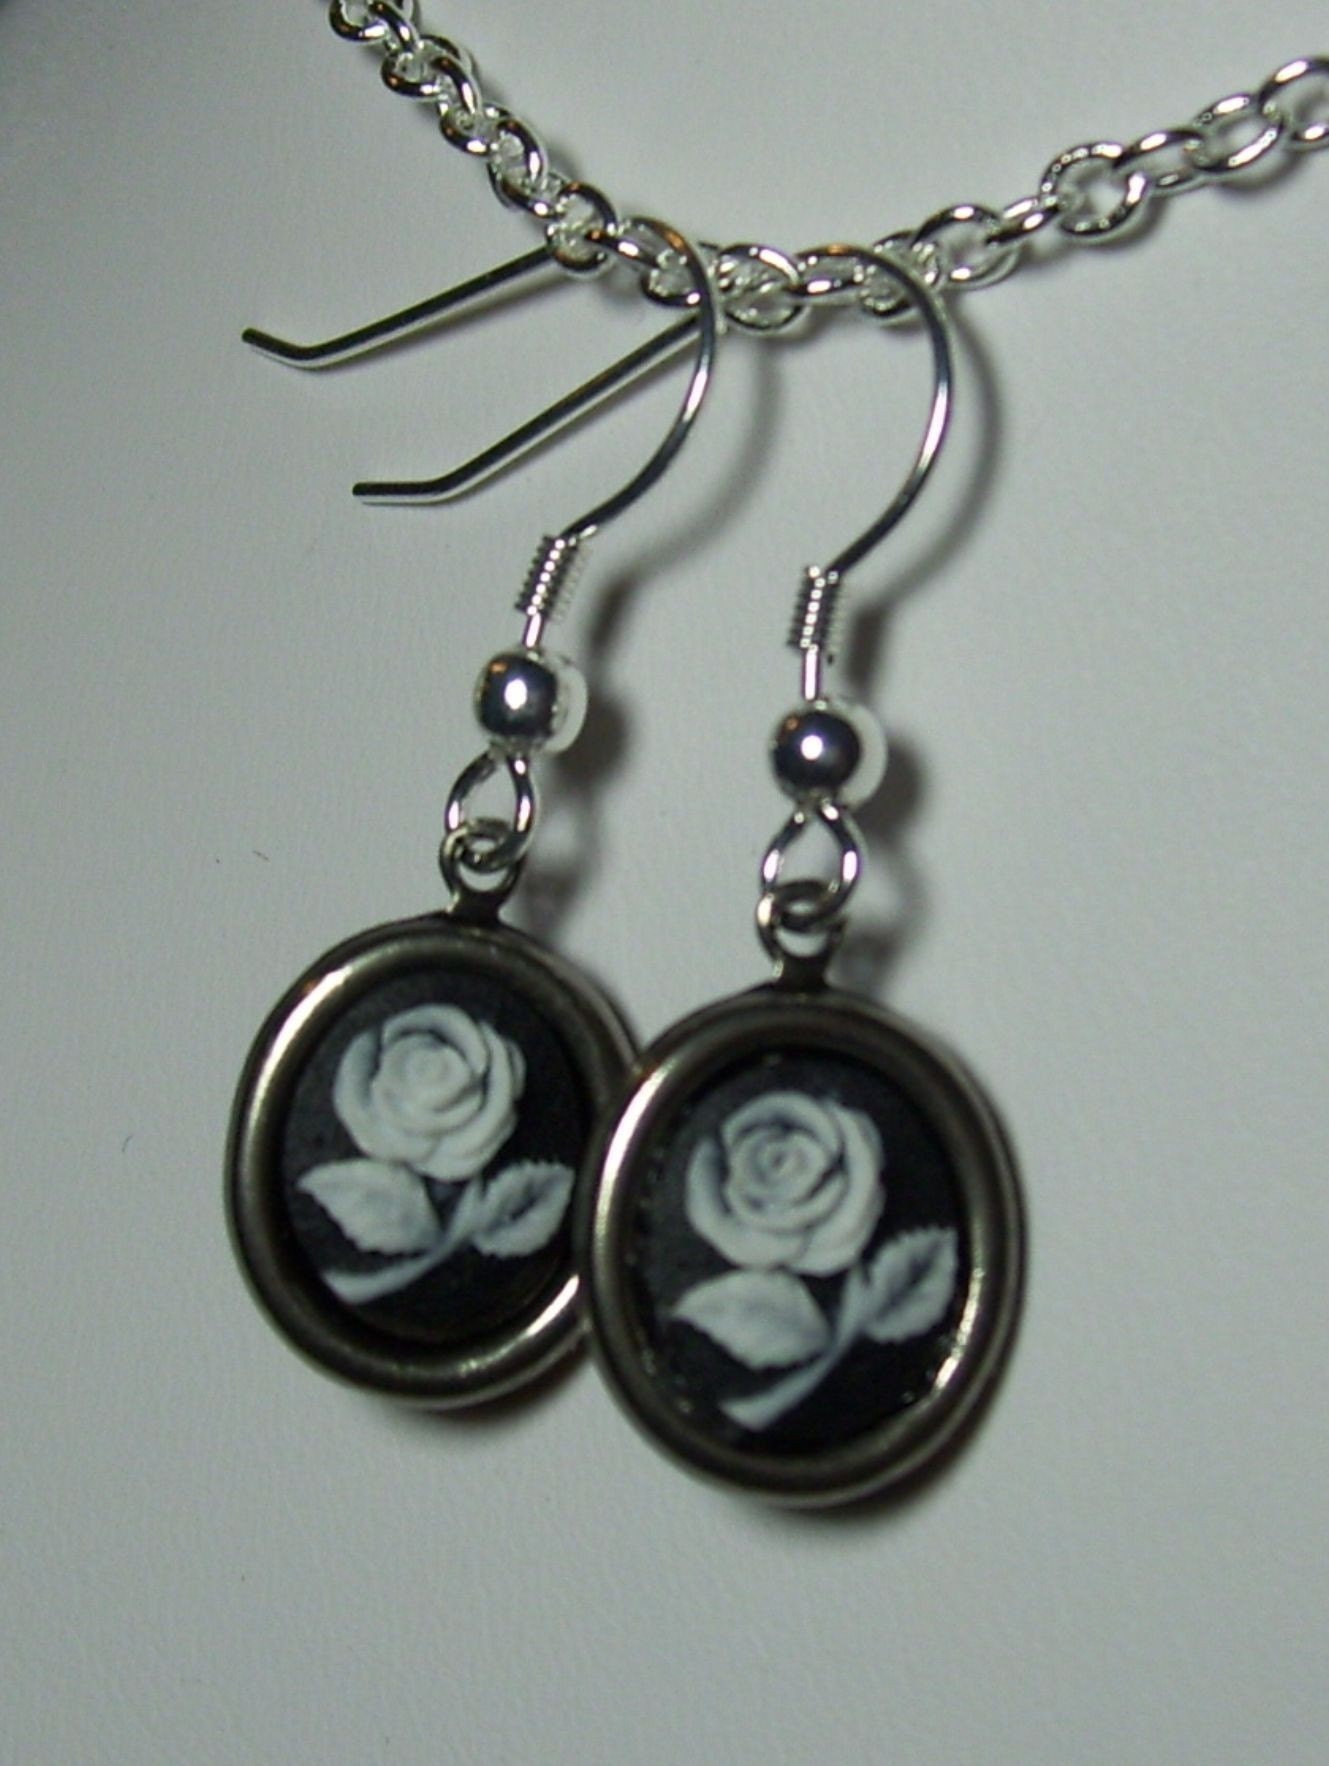 Simply Delicate Tiny Rose Cameo Flower Neo Victorian Steampunk Earrings Silver Black White